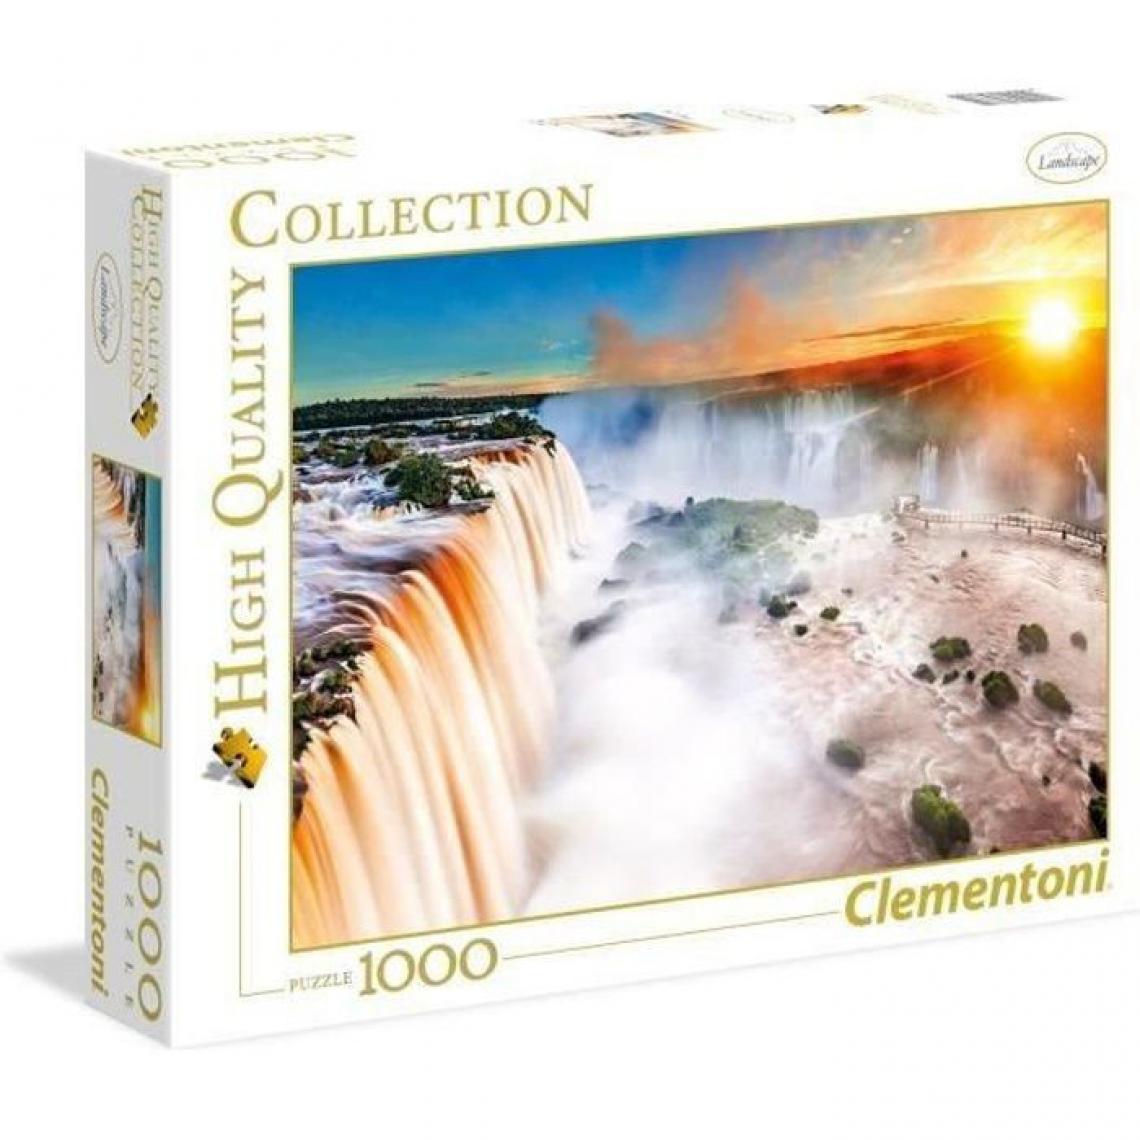 Clementoni - PUZZLE 1000 pieces - Waterfall - Animaux